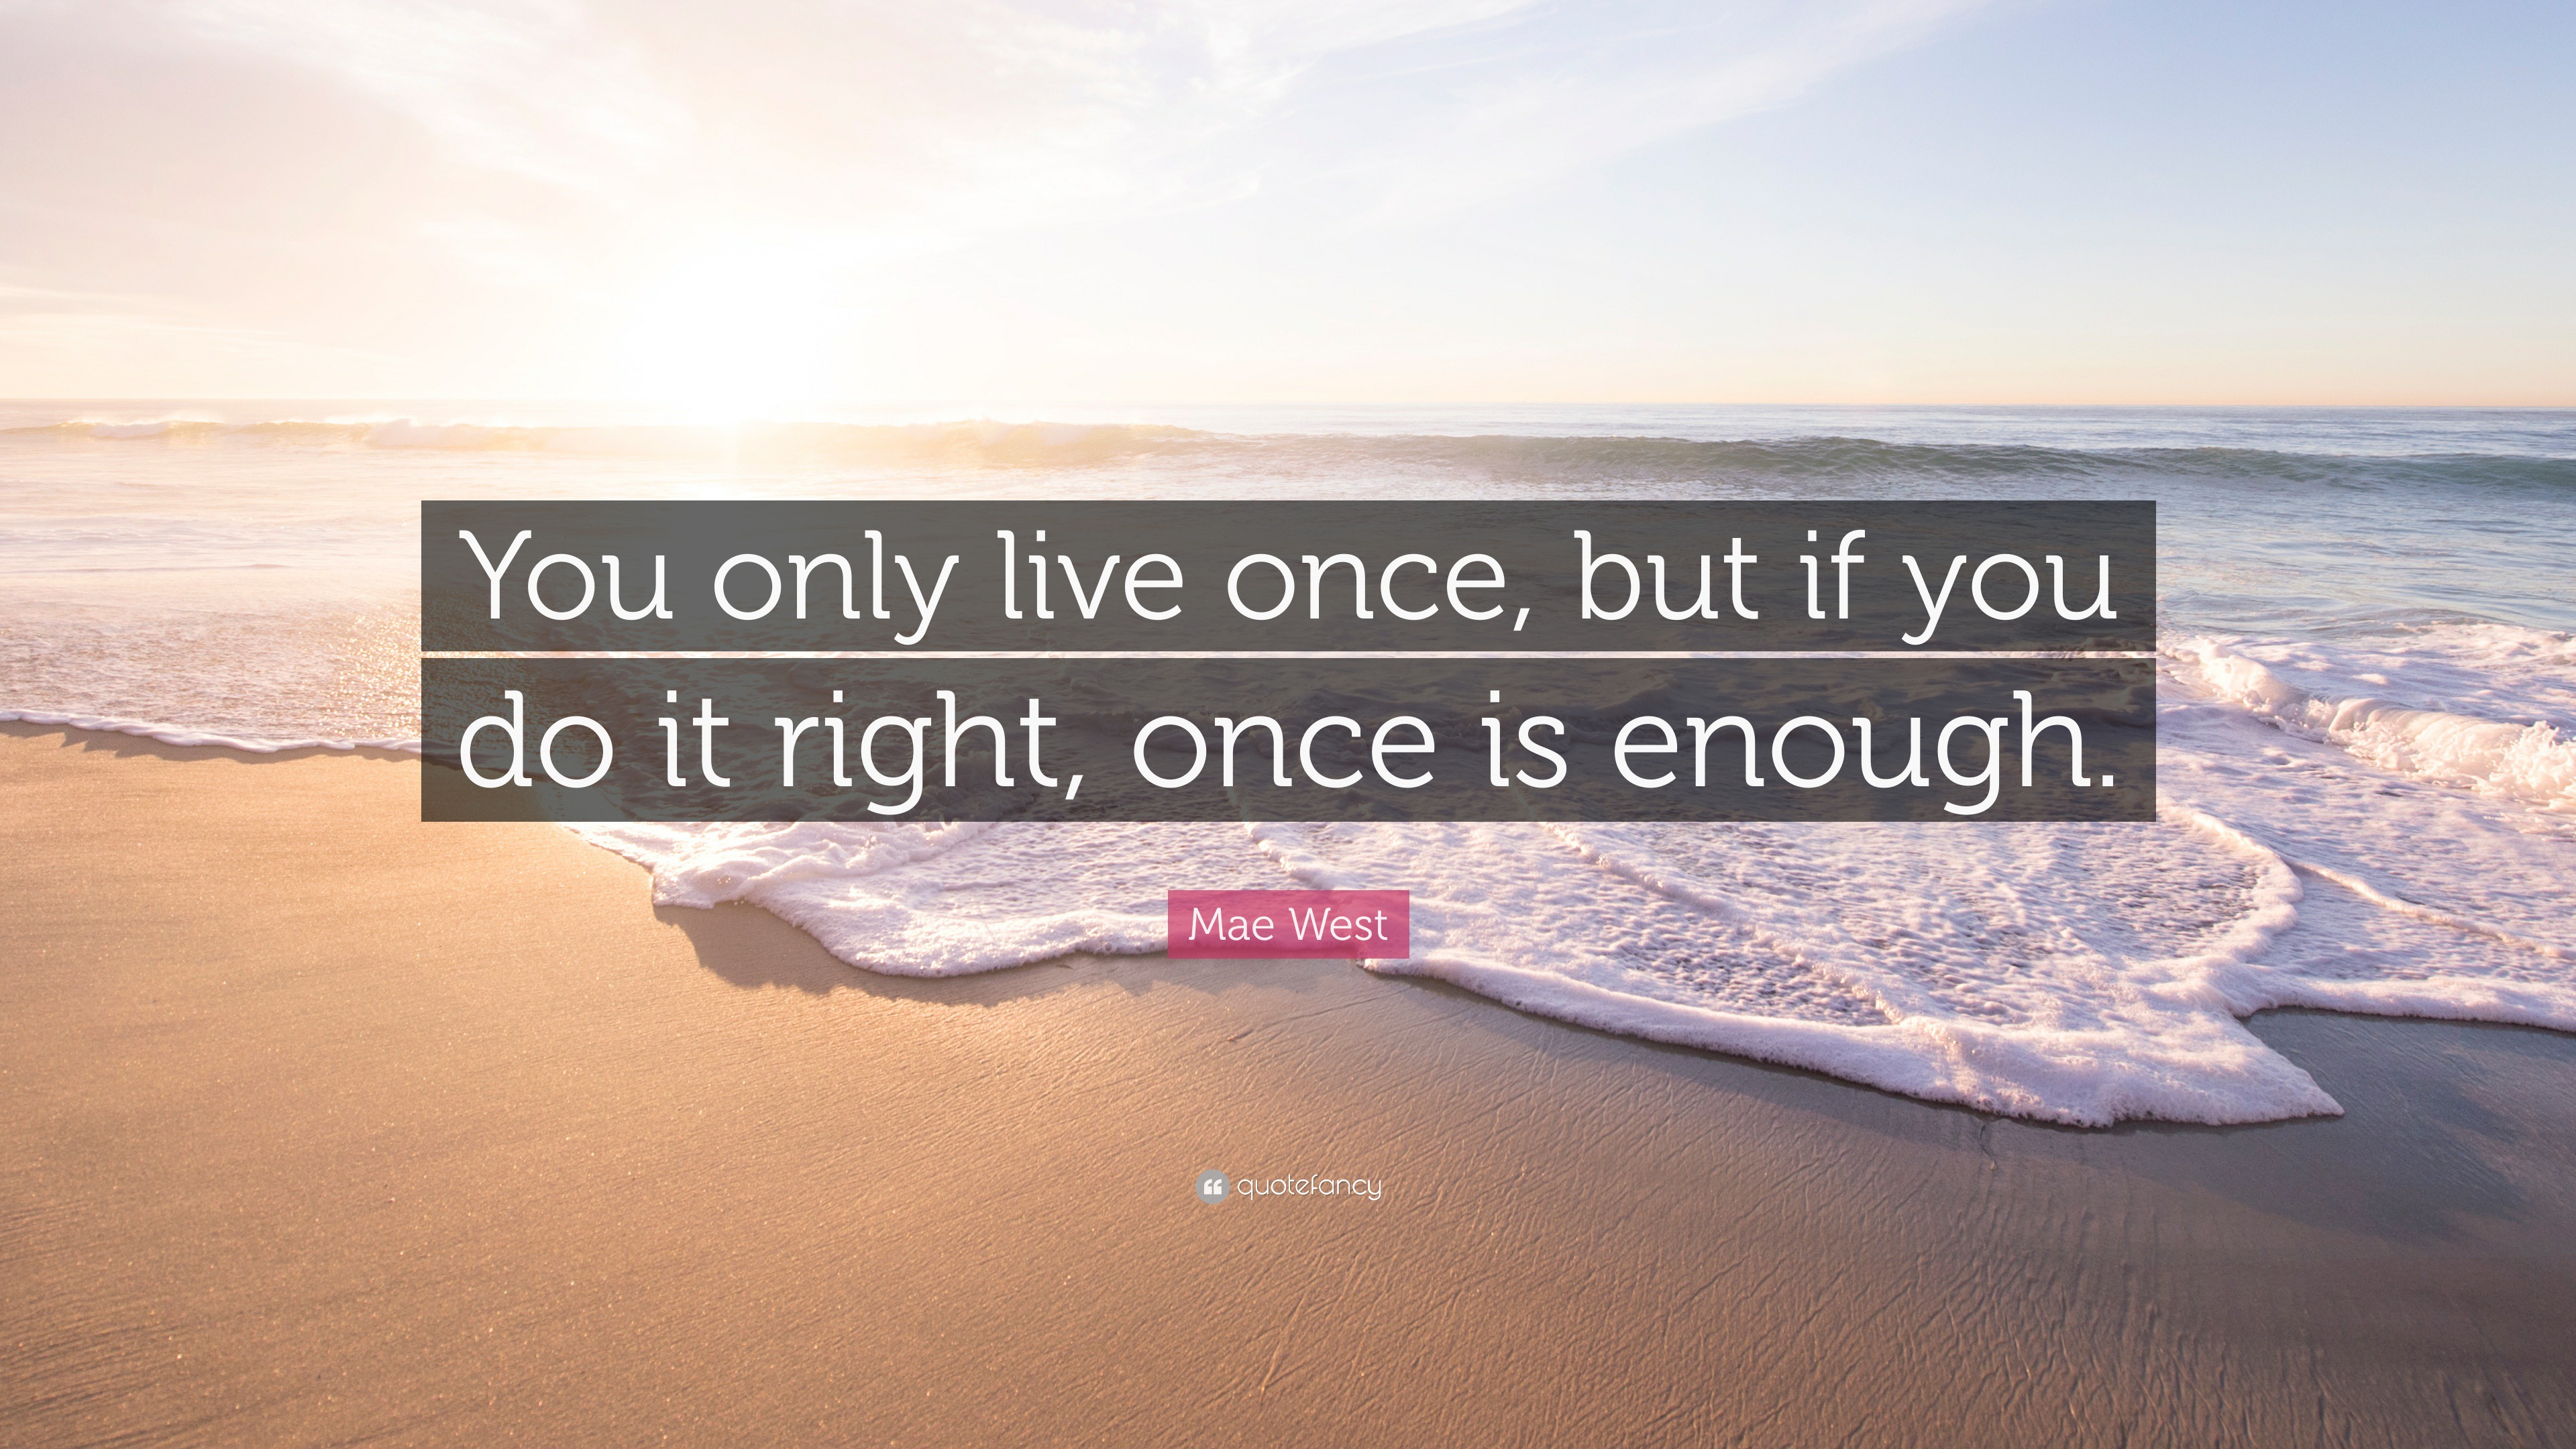 Life Quotes “You only live once but if you do it right